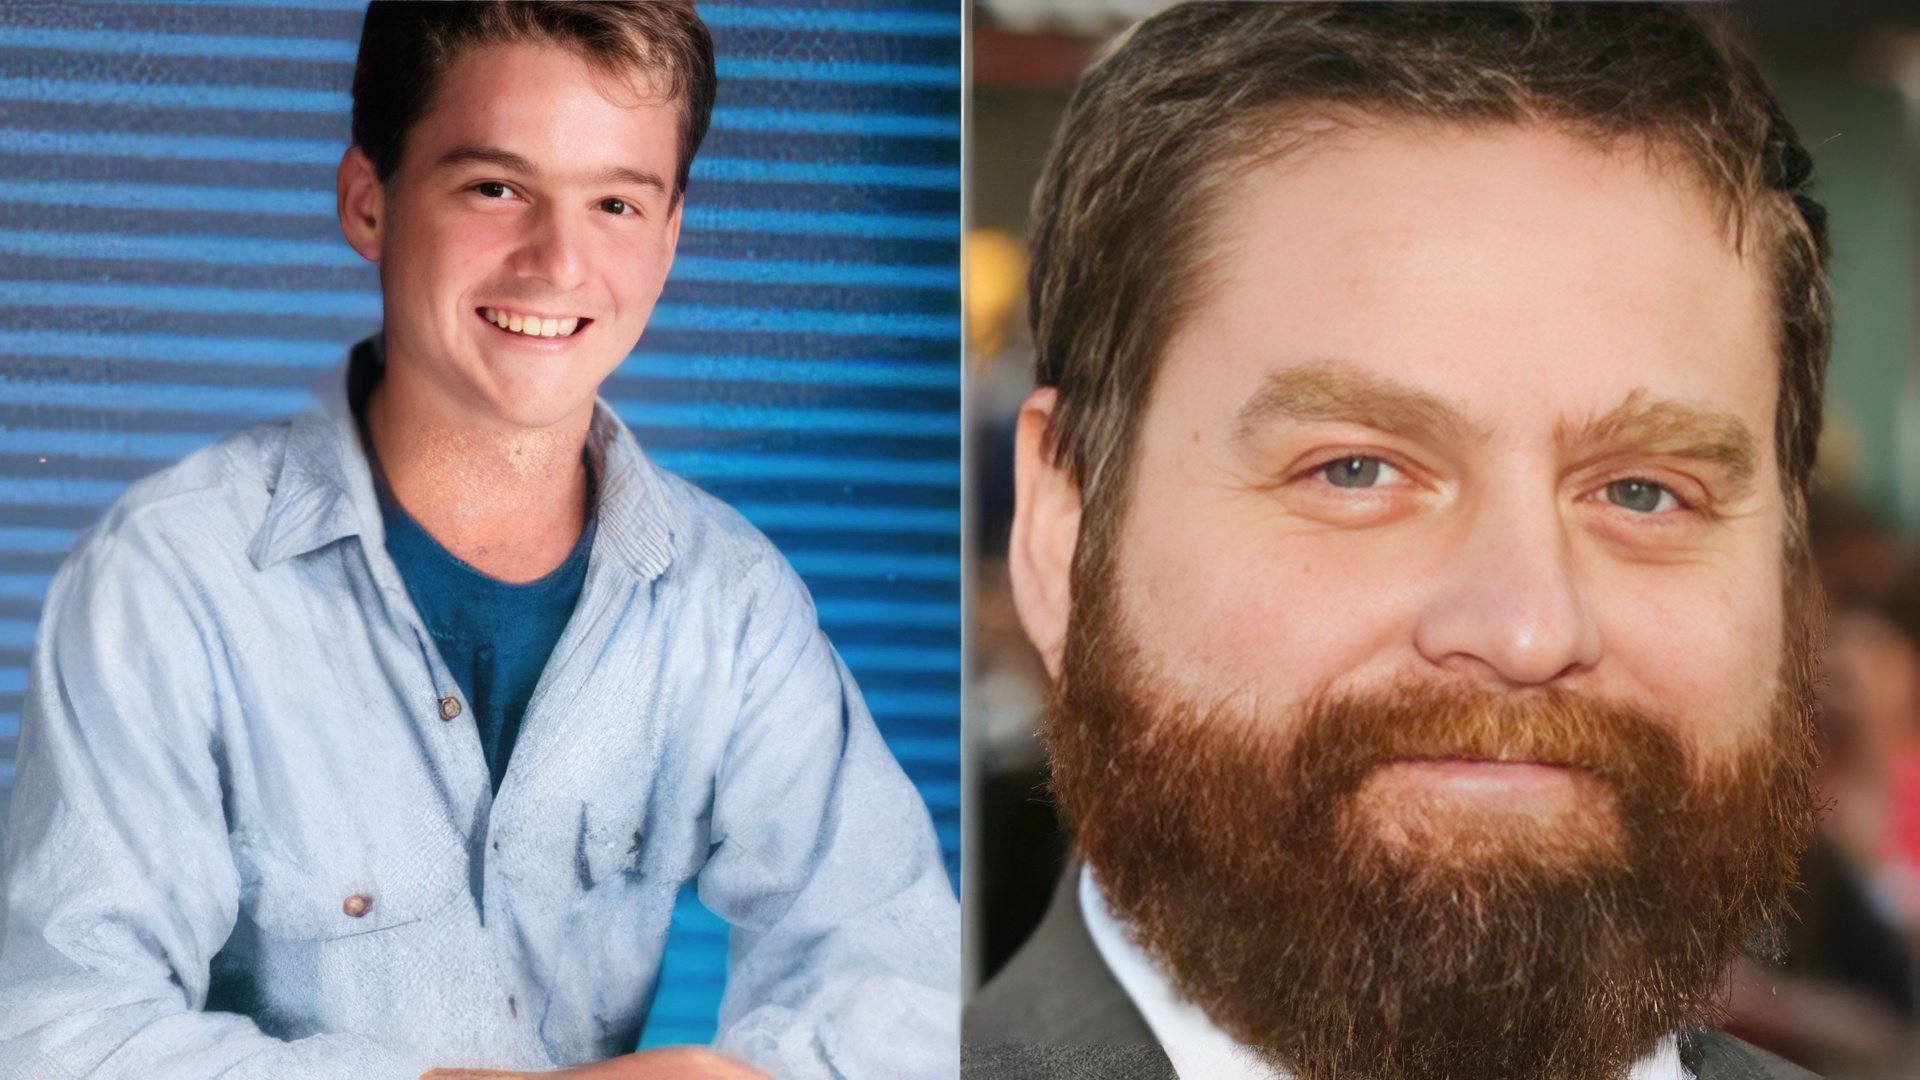 Zach Galifianakis Now and Then